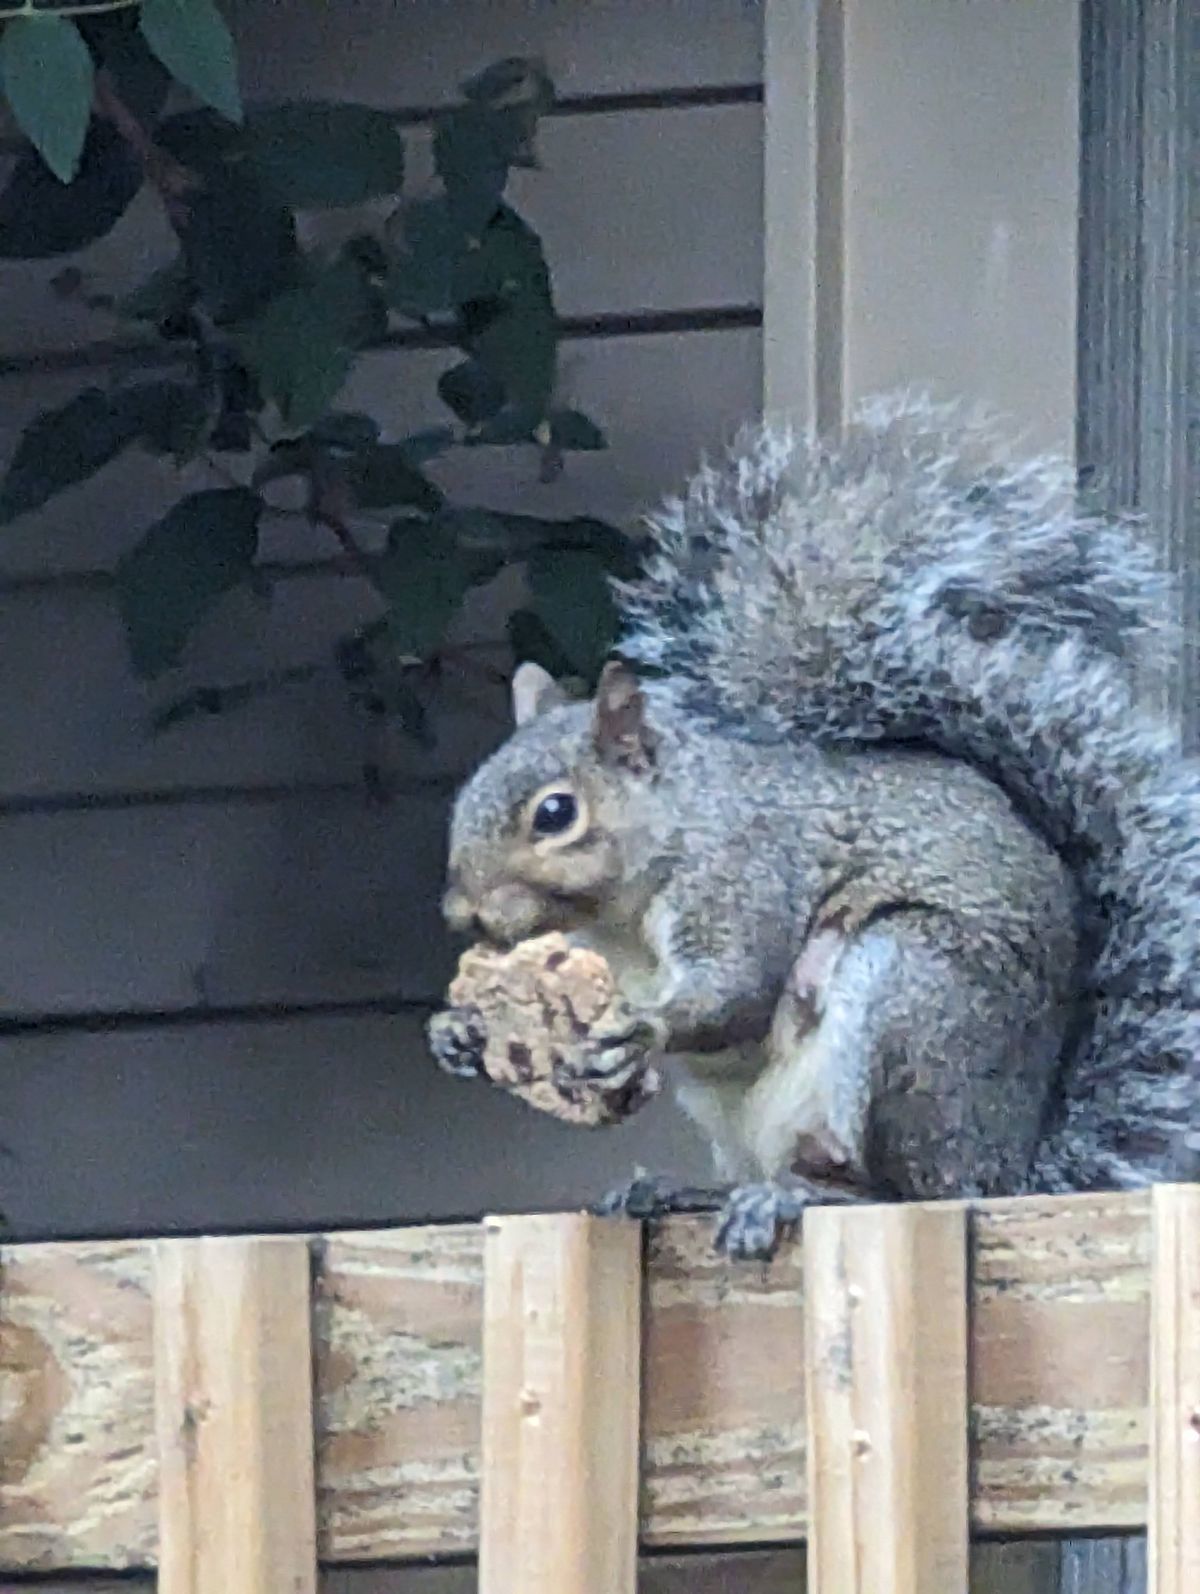 If you give a squirrel a cookie